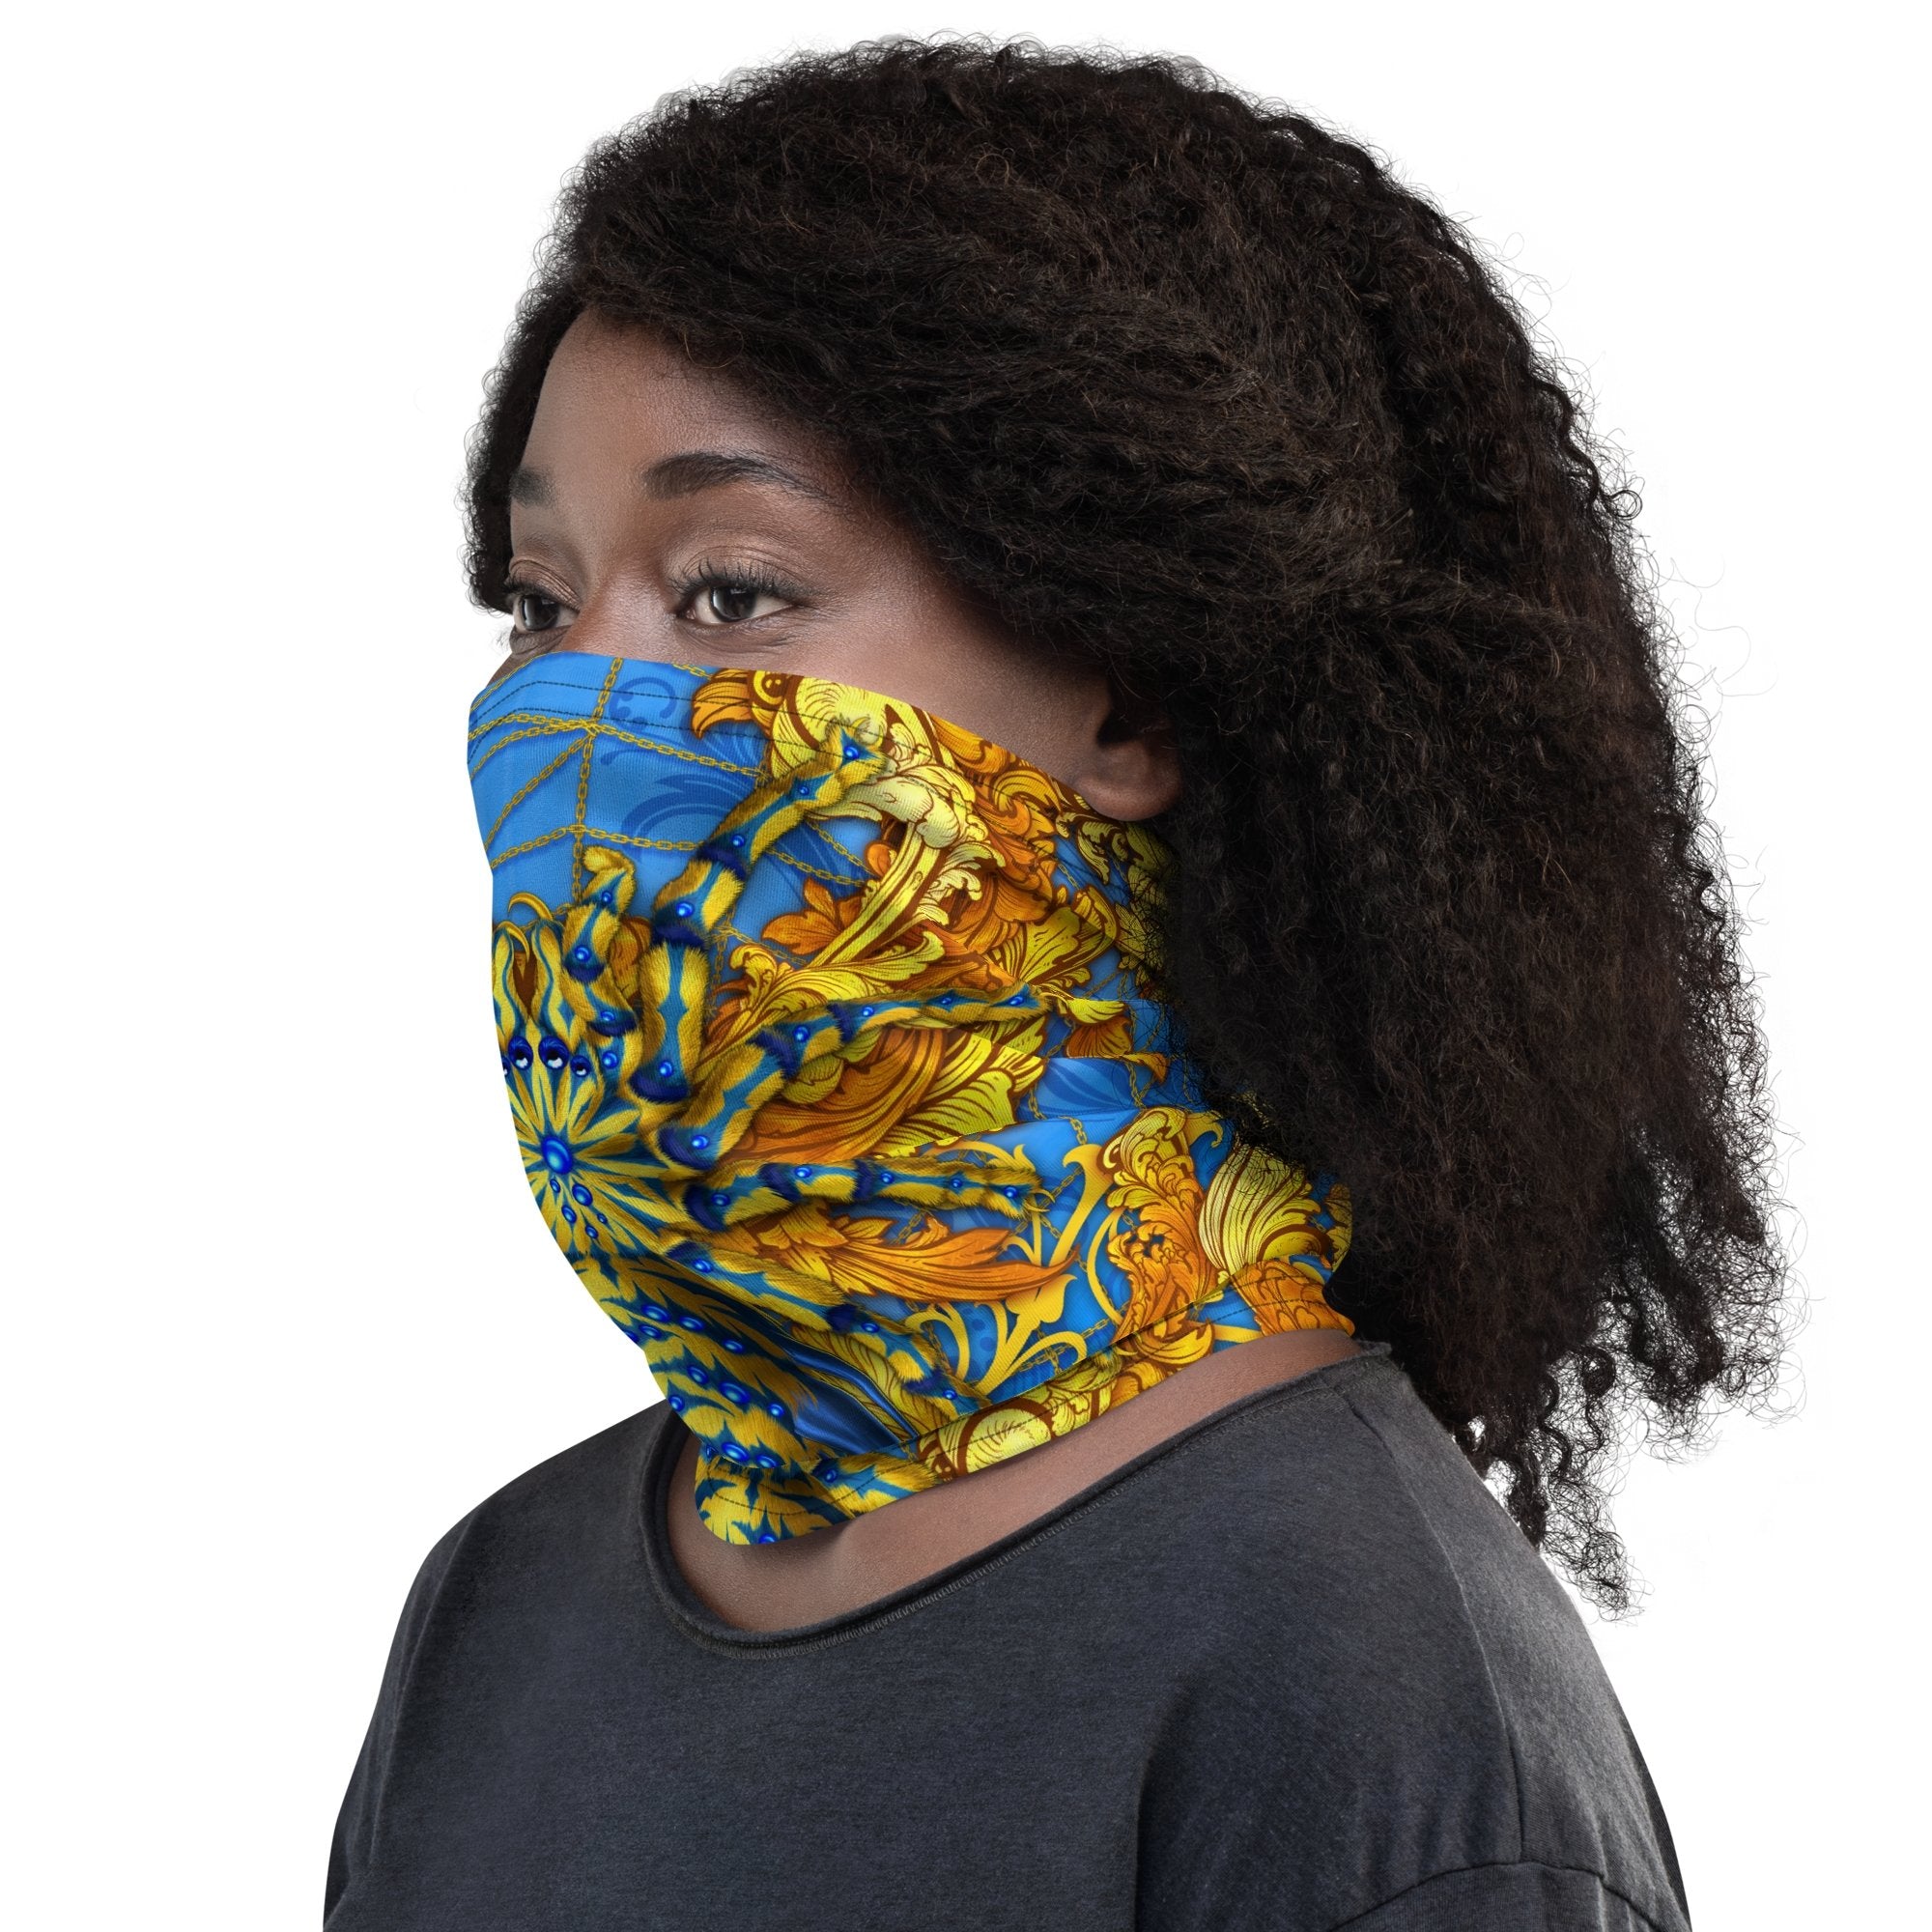 Spider Neck Gaiter, Face Mask, Head Covering, Indie Festival Outfit, Tarantula Lover Gift - Cyan and Gold - Abysm Internal